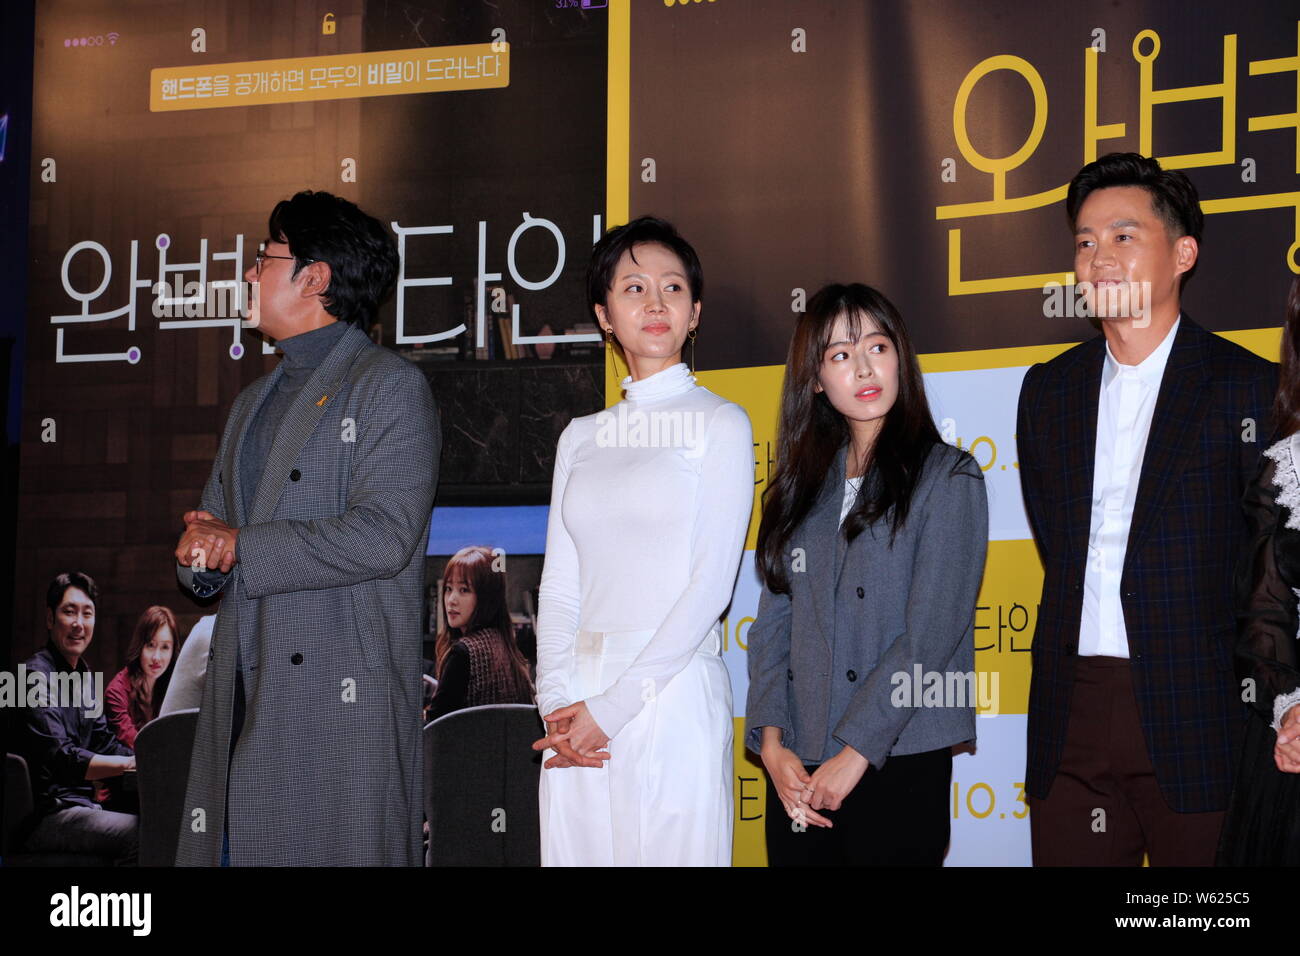 (From left) South Korean actor Cho Jin-woong, actresses Yum Jung-ah, Ji Woo, and actor Lee Seo-jin attend the premiere event fot new movie 'Intimate S Stock Photo